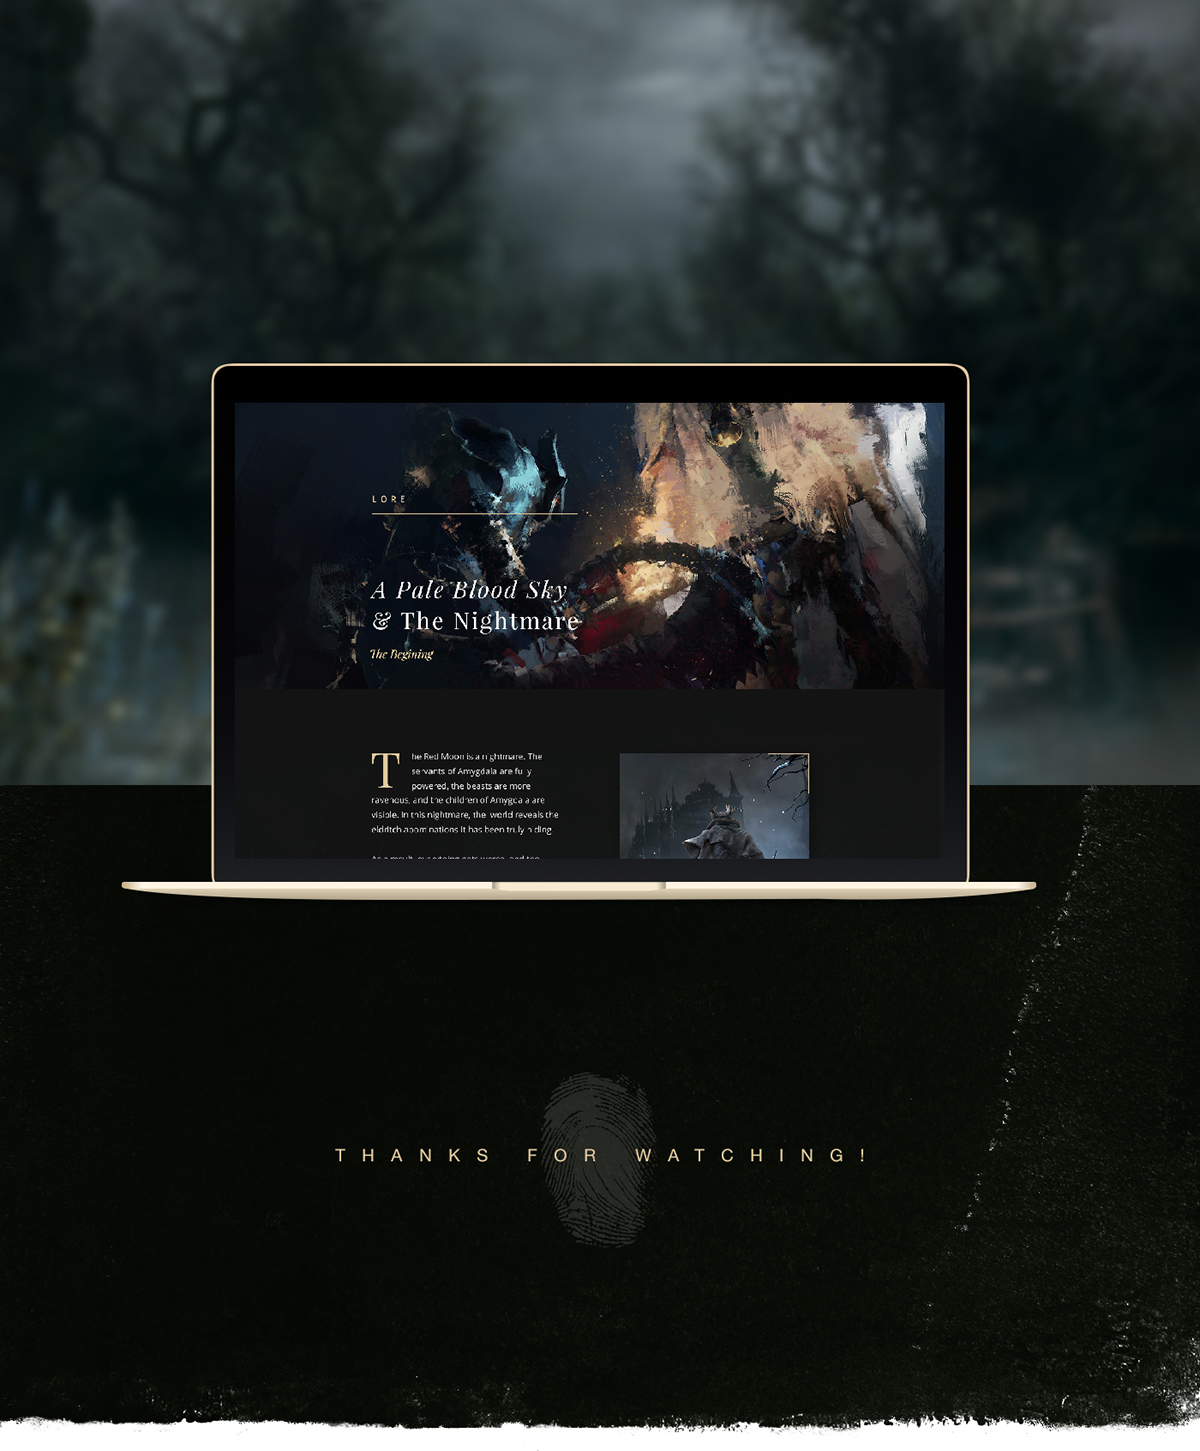 user experience landing page Gaming Bloodborne dark souls Demon's Souls playstation Sony from soft Games Video Games gothic horror lovecraft editorial